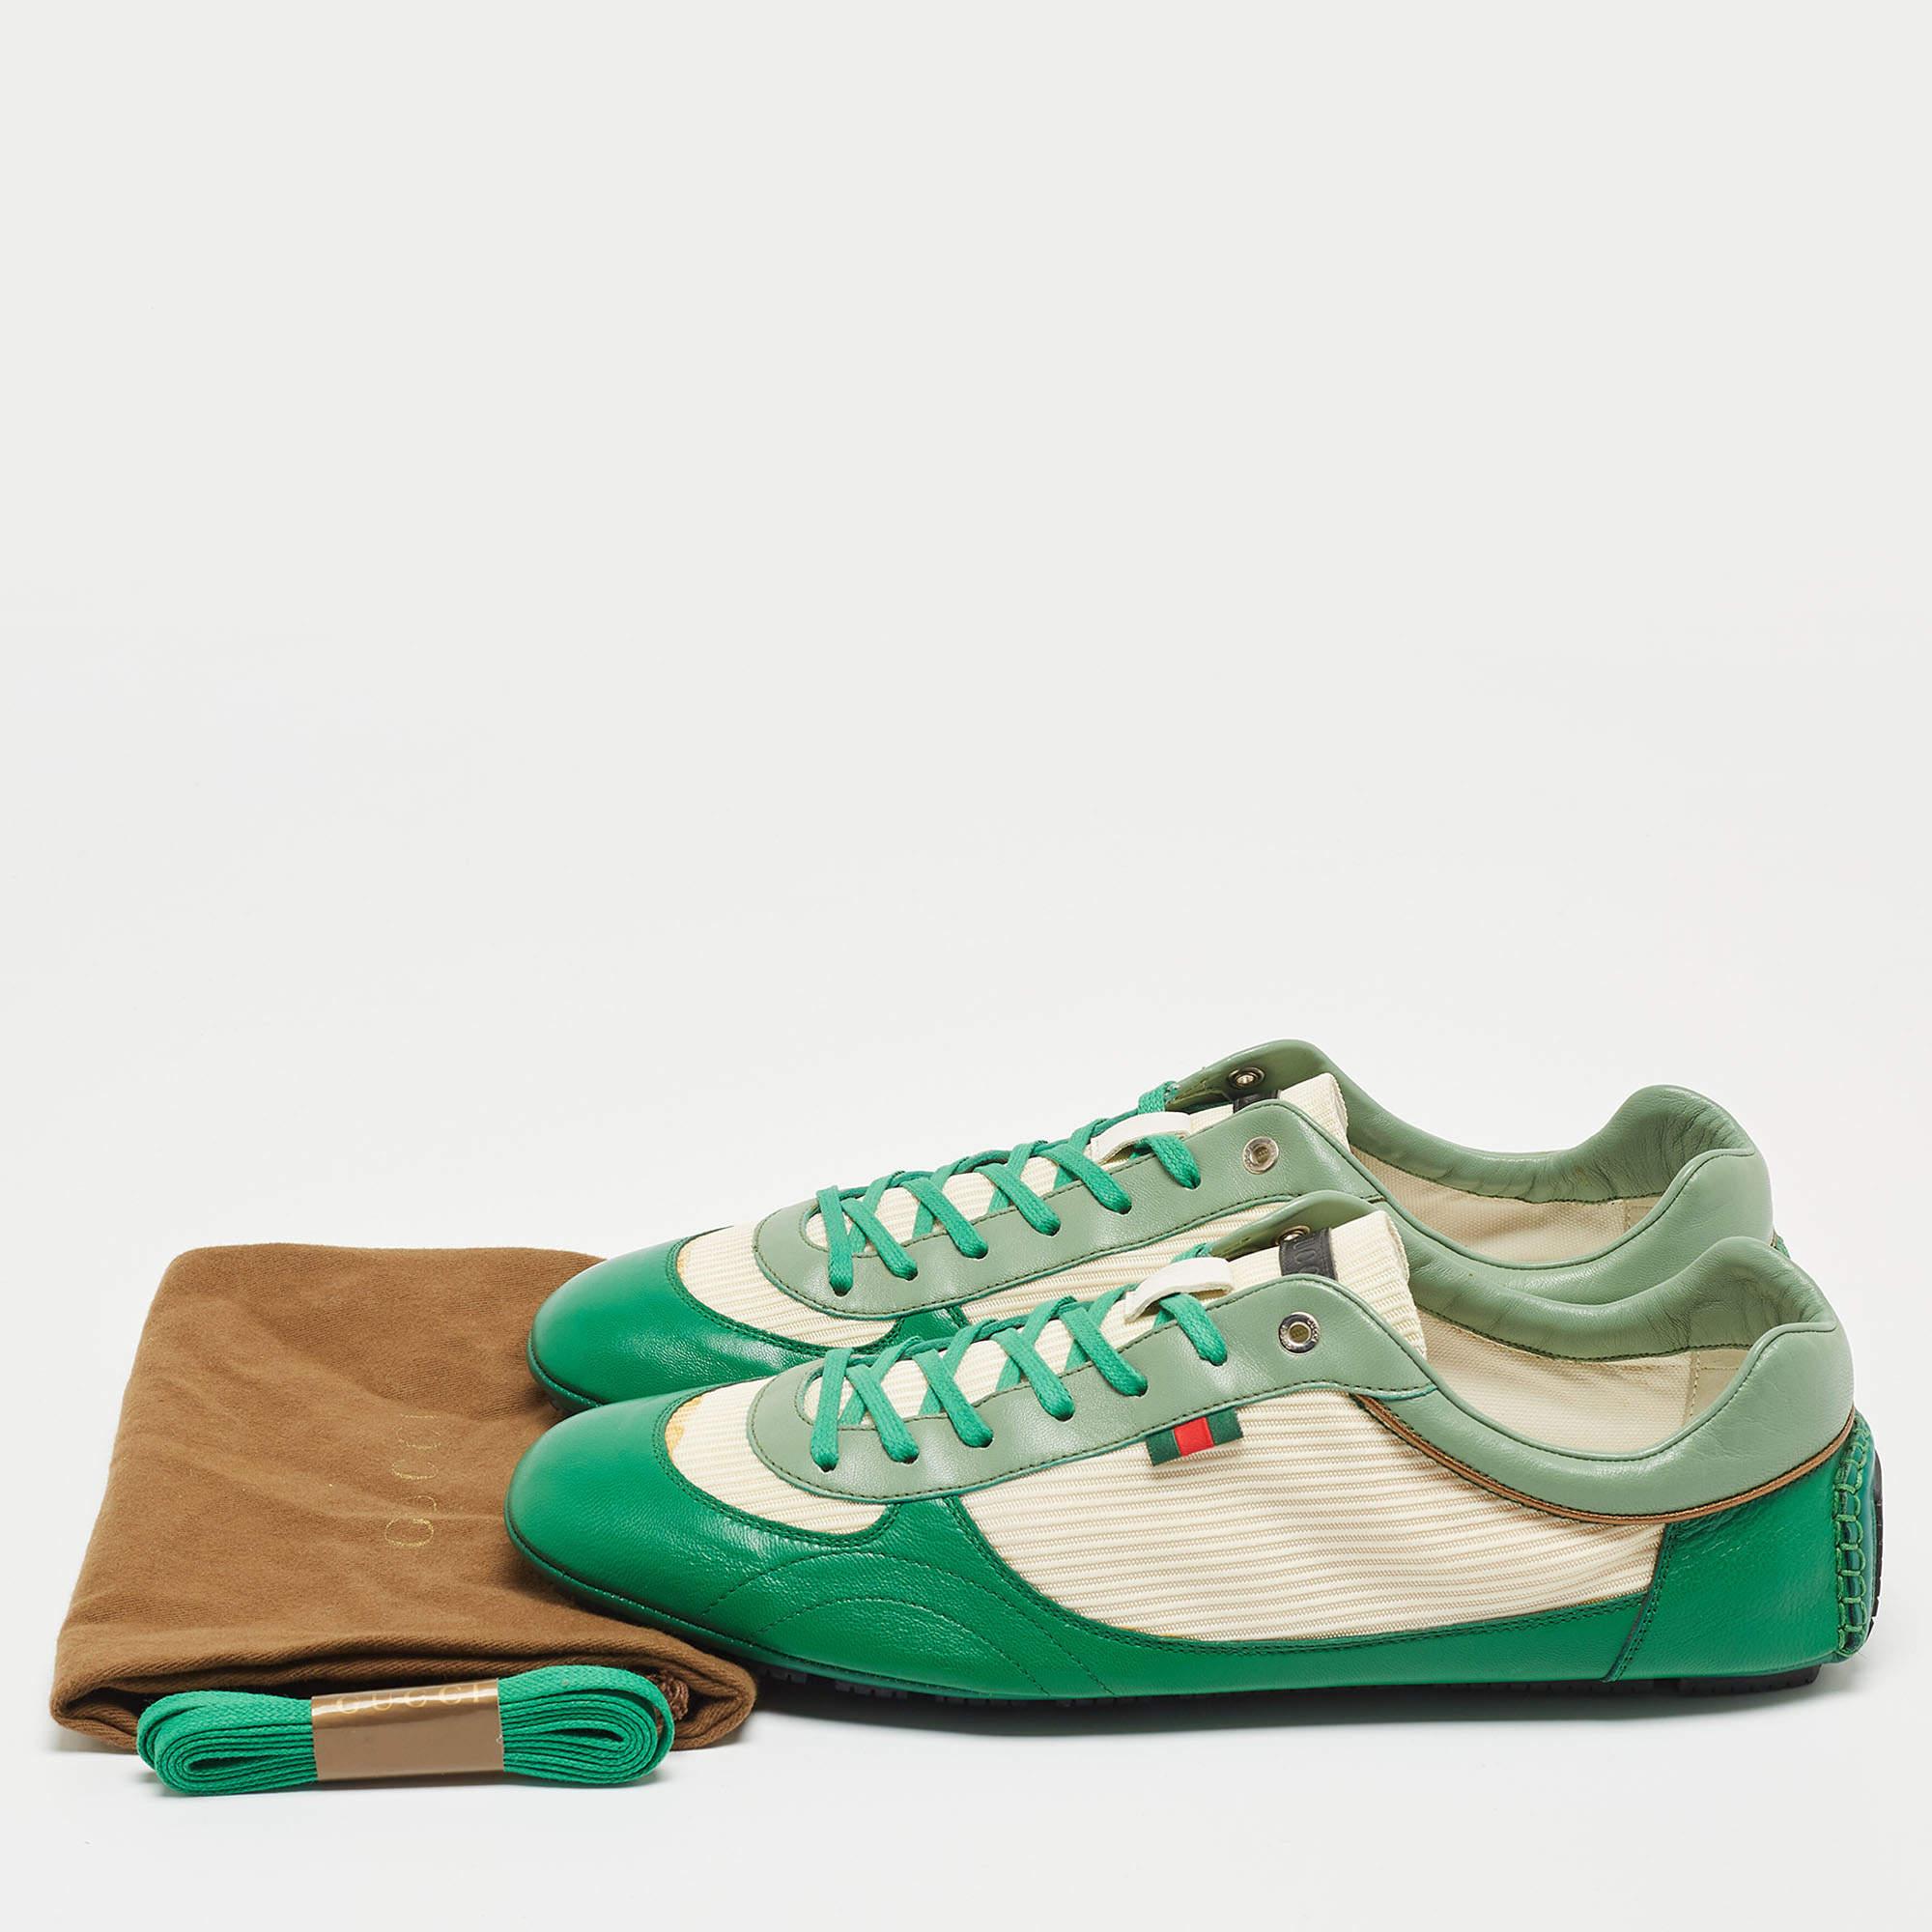 Gucci Green/White Leather and Fabric Low Top Sneakers Size 45.5 5